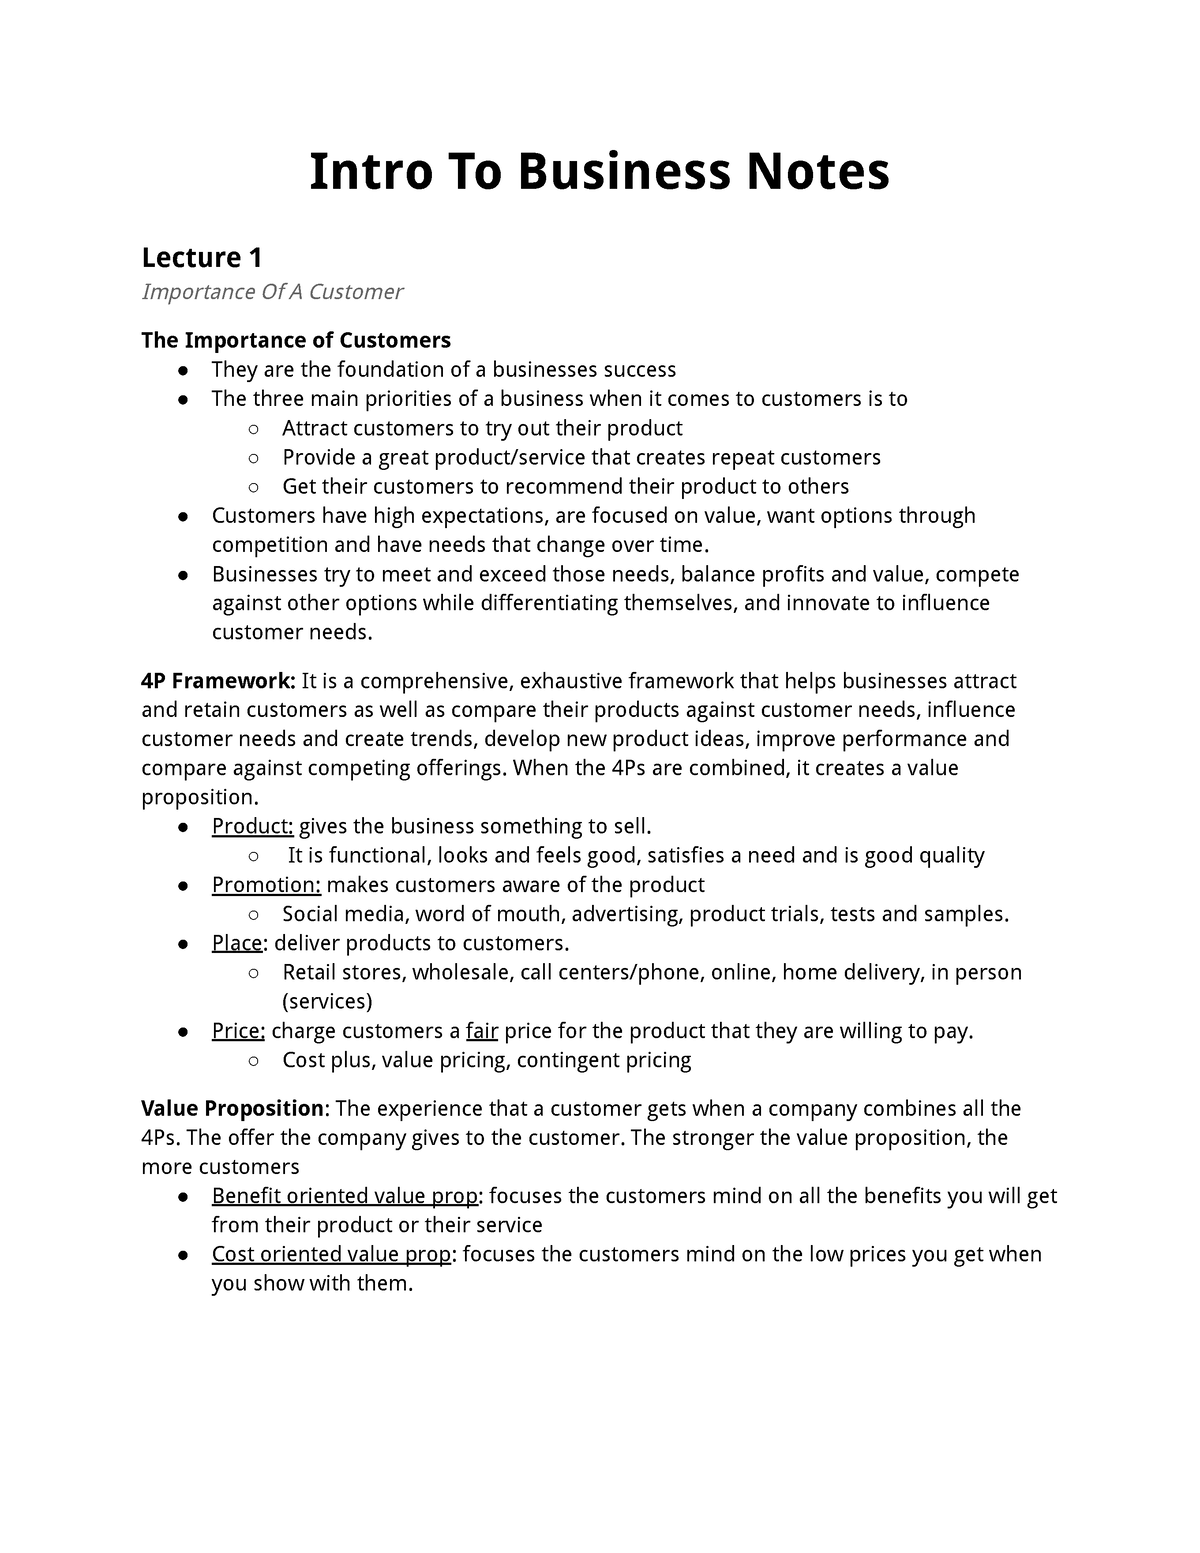 assignment introduction to business